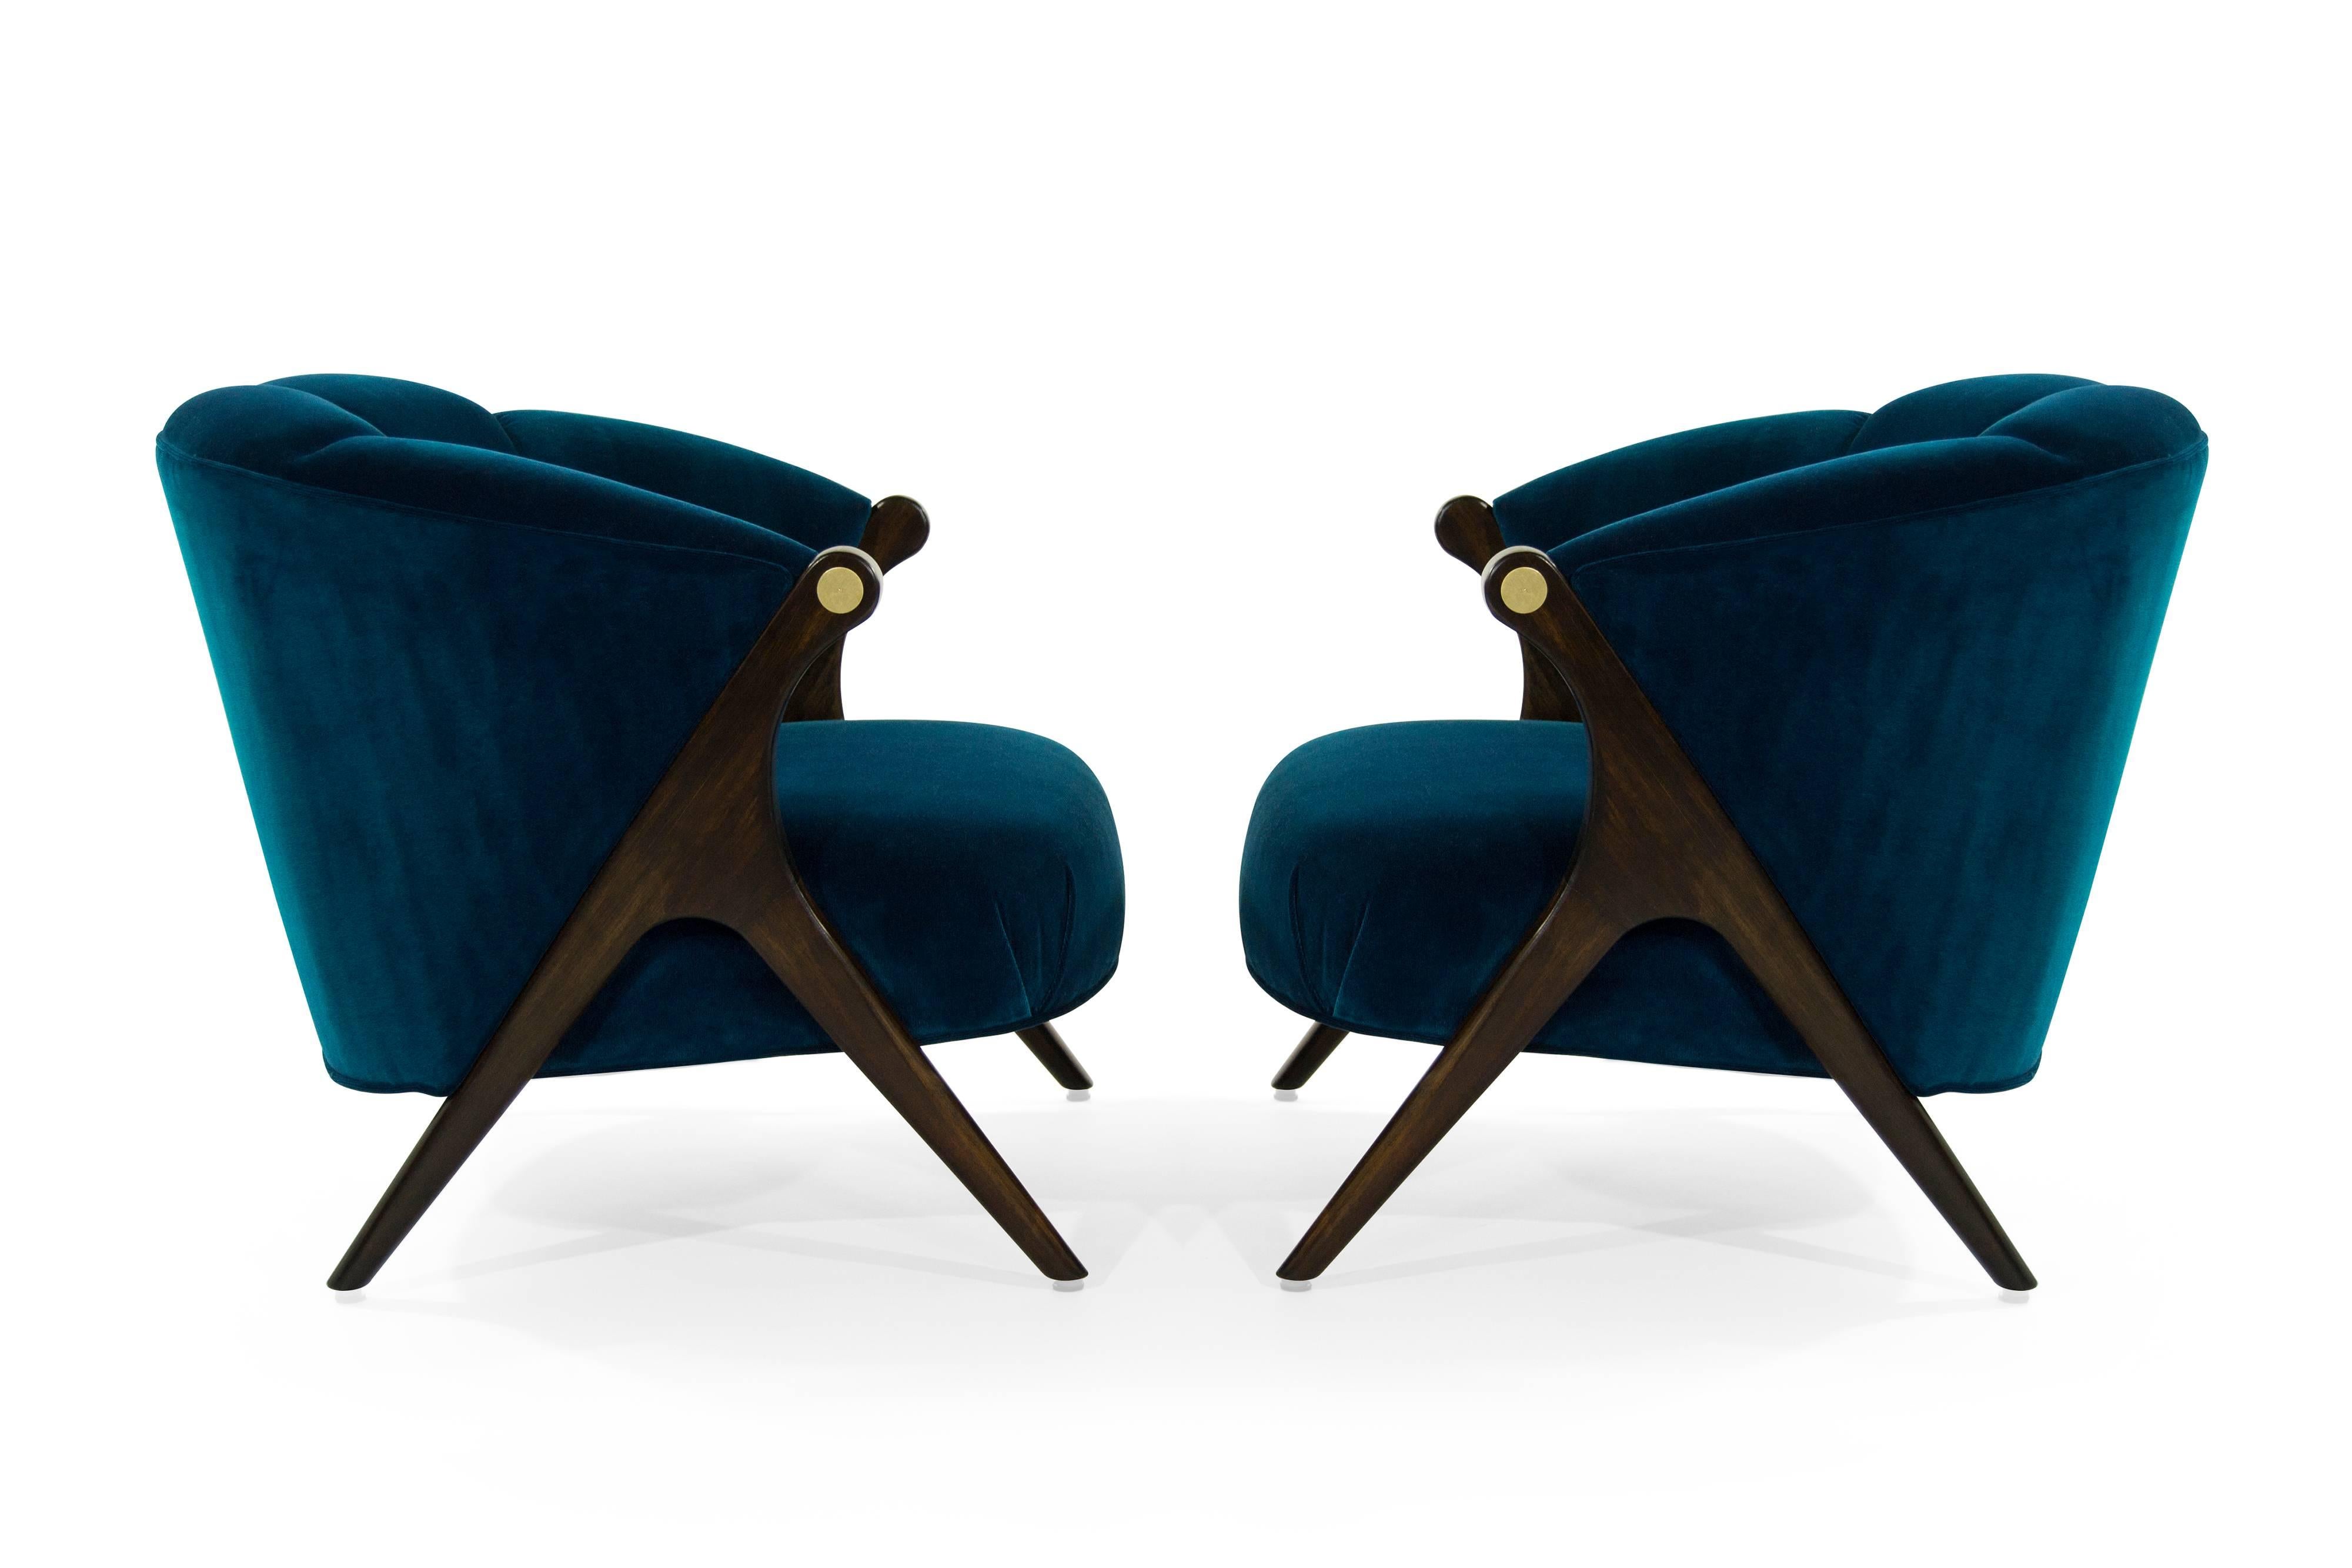 Pair of lounge chairs designed by Karpen of California, circa 1950s.

Walnut legs fully restored, brass accents on arms newly polished, Newly upholstered in aqua plush velvet by Holly Hunt.